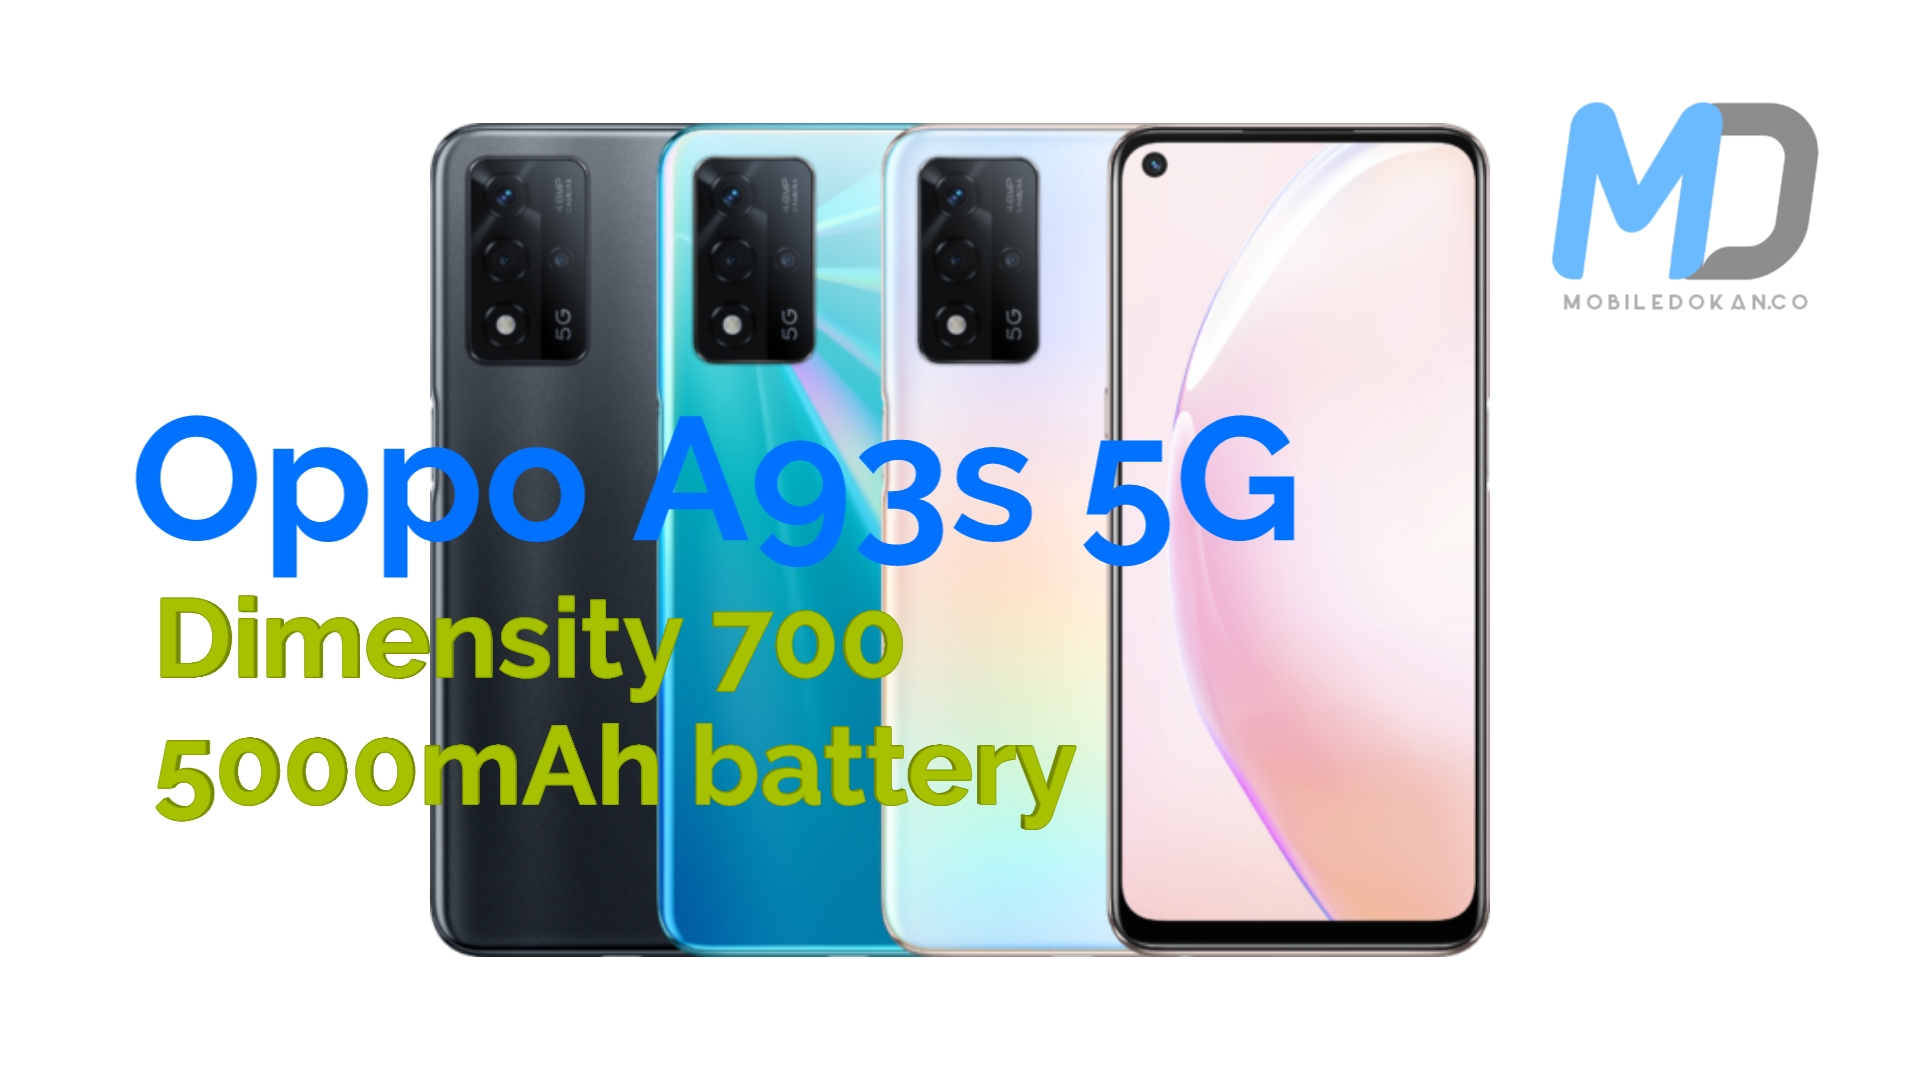 Oppo A93s 5G launched in China with Dimensity 700, 5000mAh battery